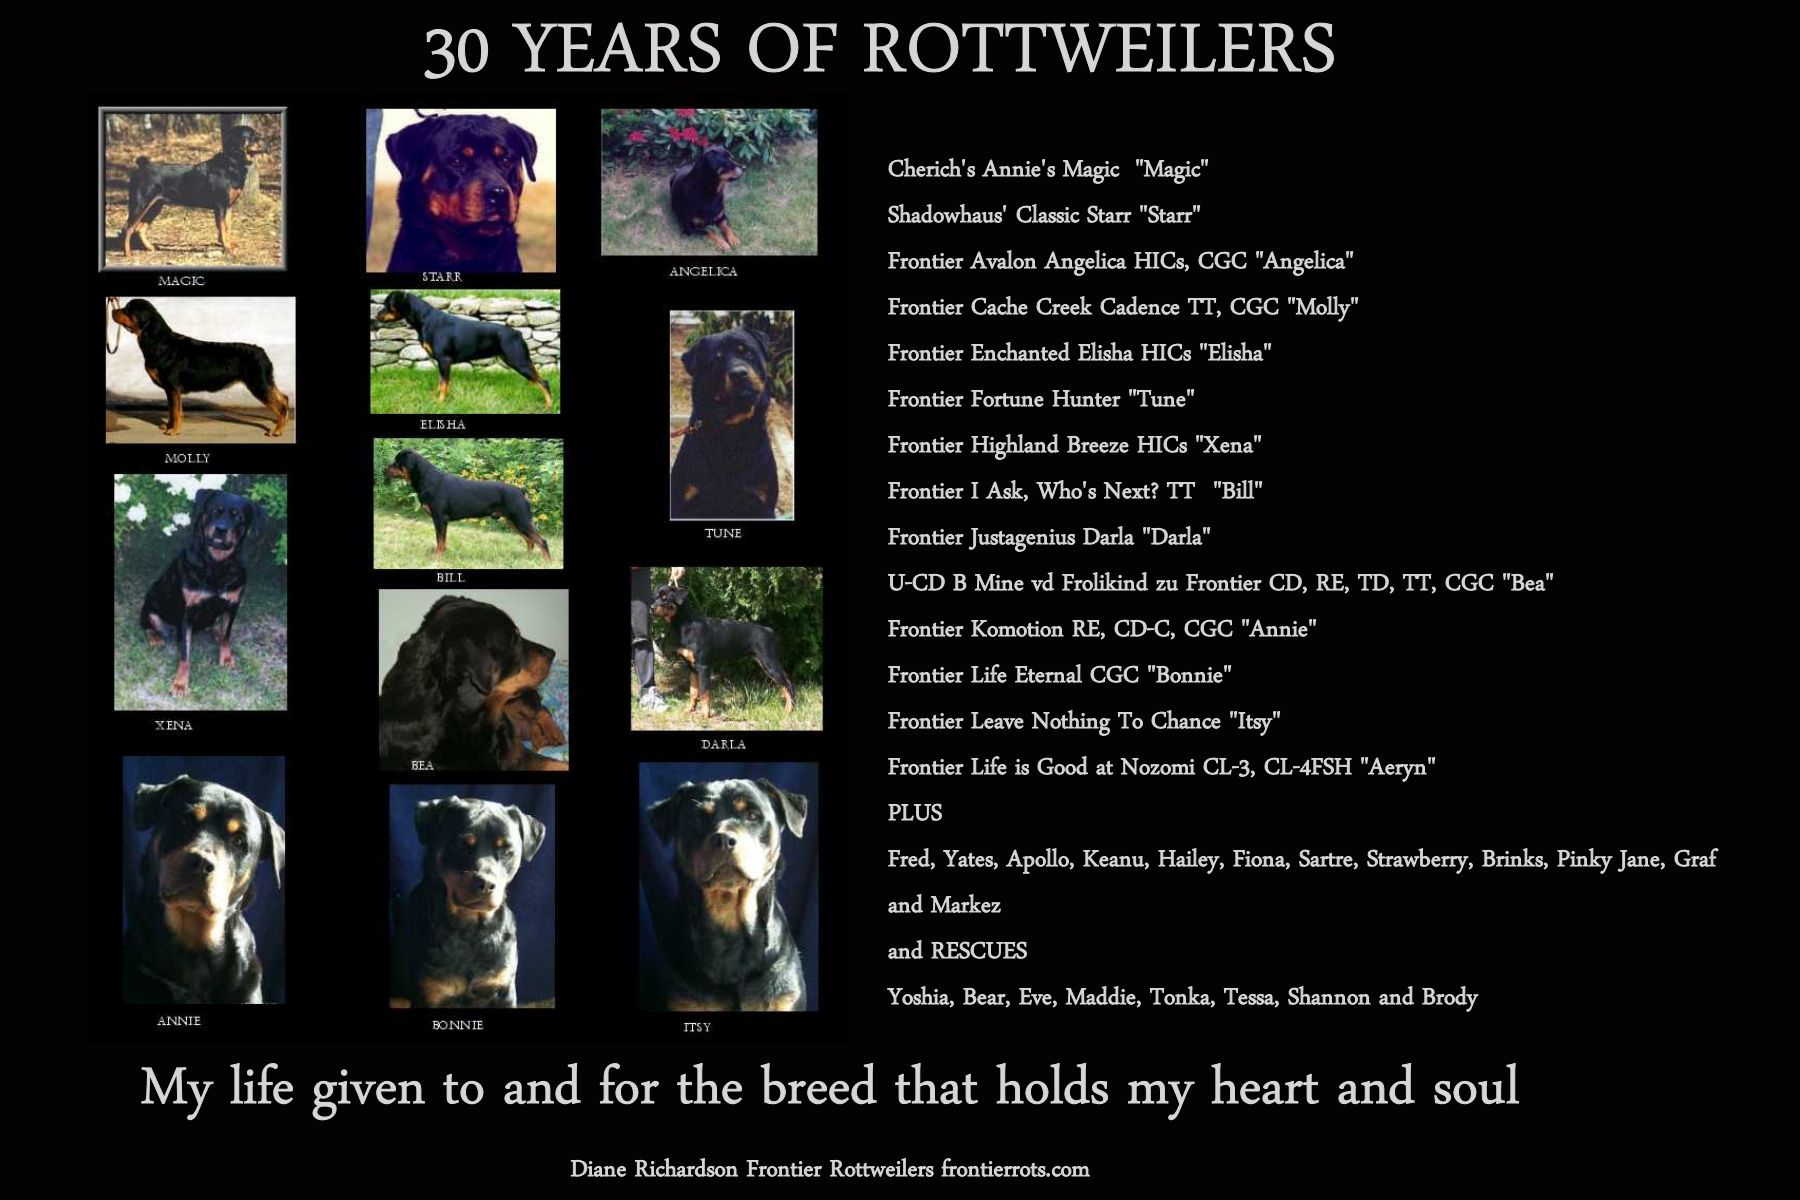 30 years rottweilers